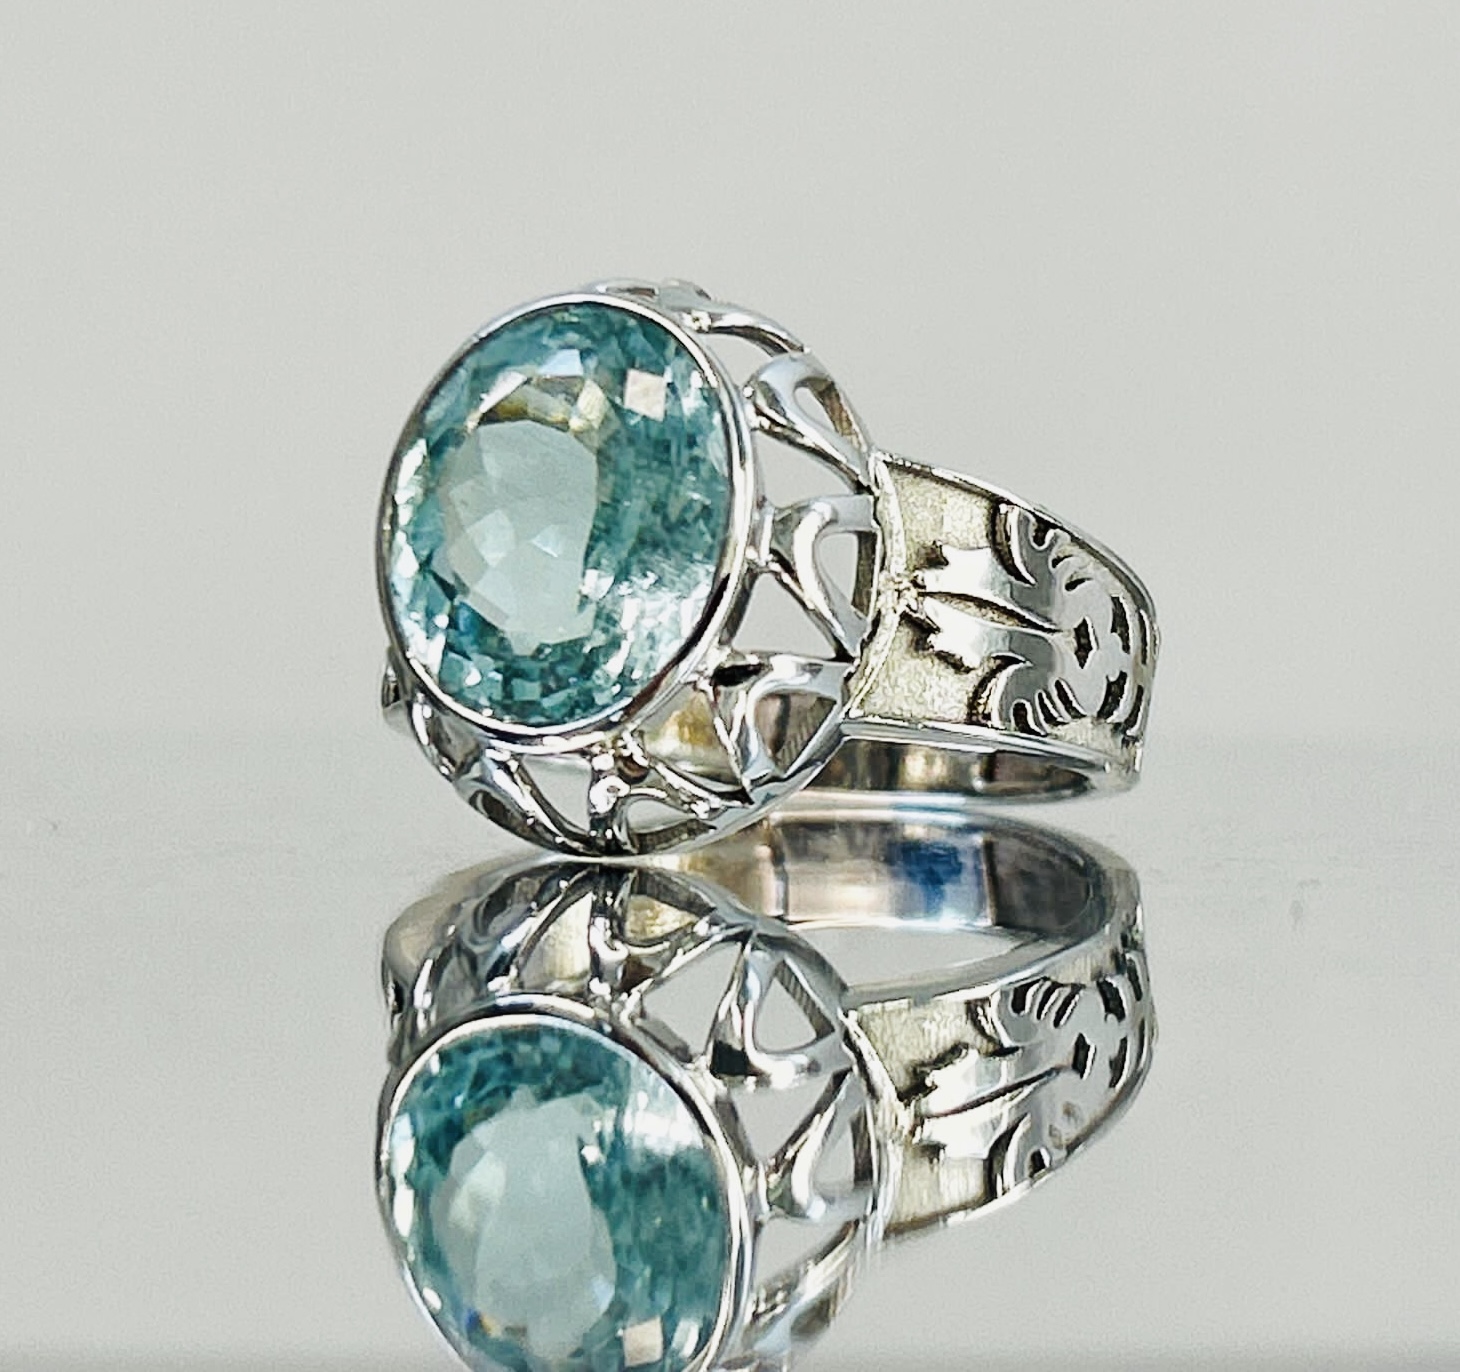 Beautiful Natural Flawless 4.58 CT Aquamarine Ring With Diamonds and 18k Gold - Image 3 of 5